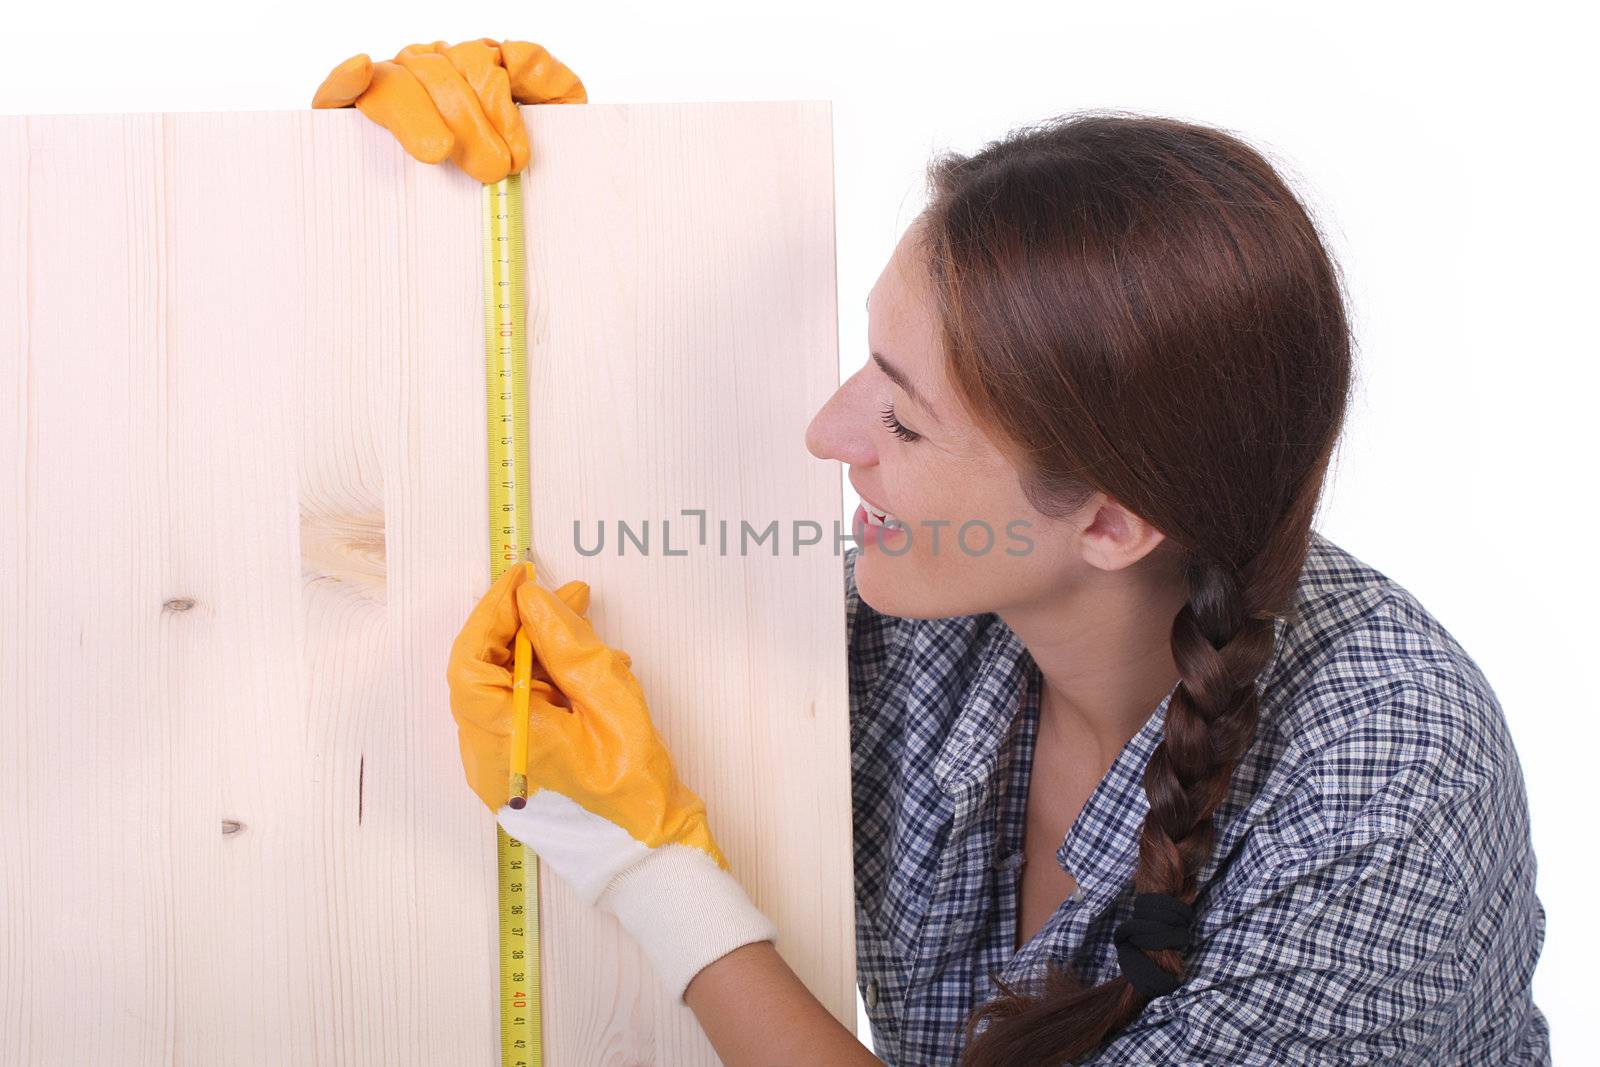 woman carpenter with wooden plank and measuring tape 